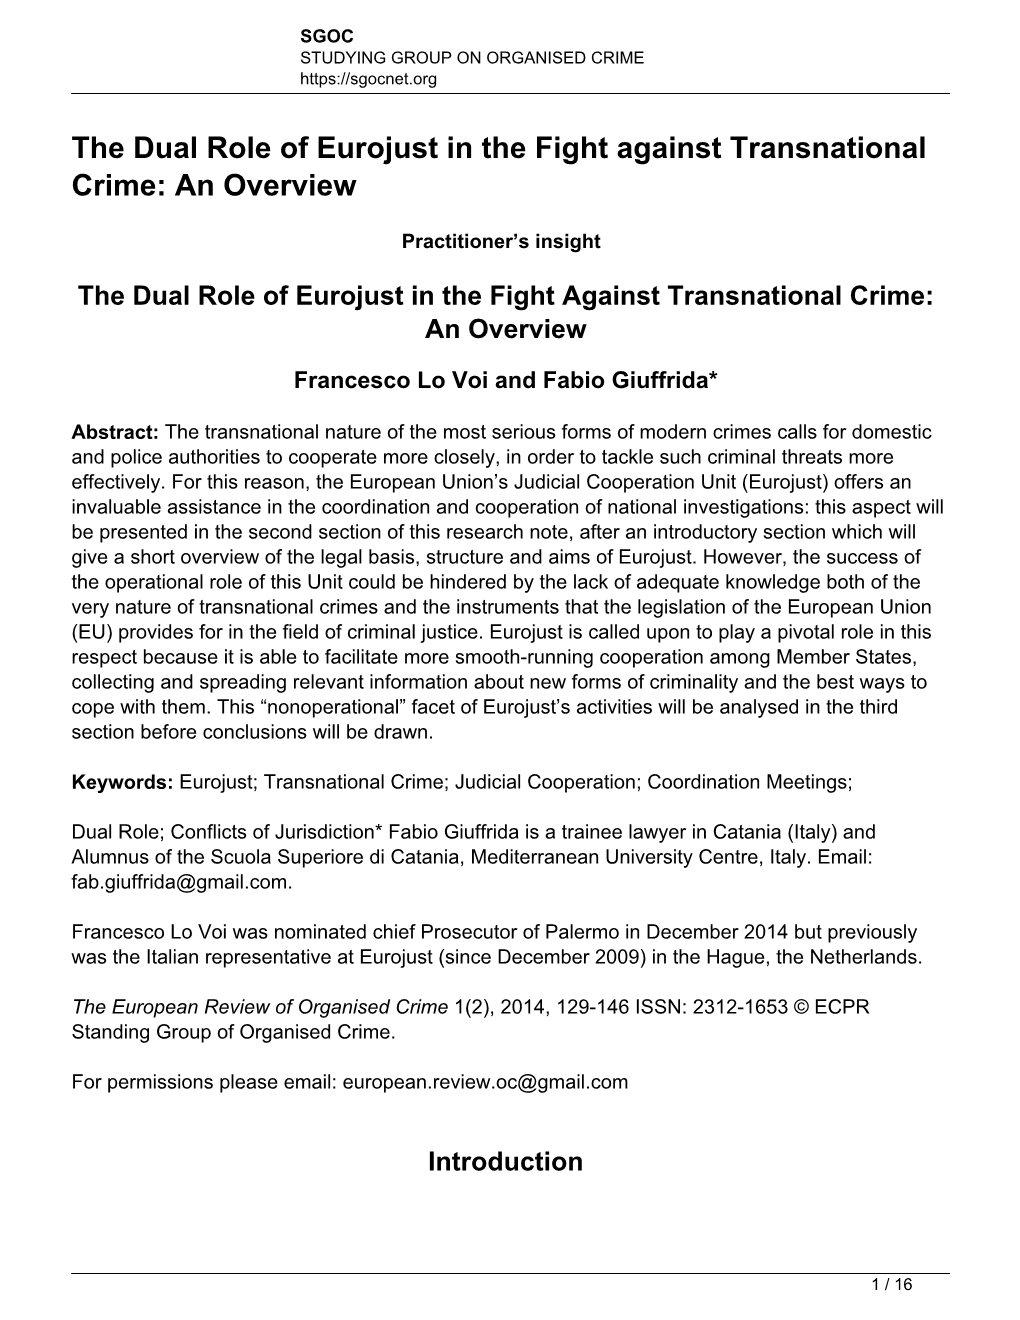 The Dual Role of Eurojust in the Fight Against Transnational Crime: an Overview